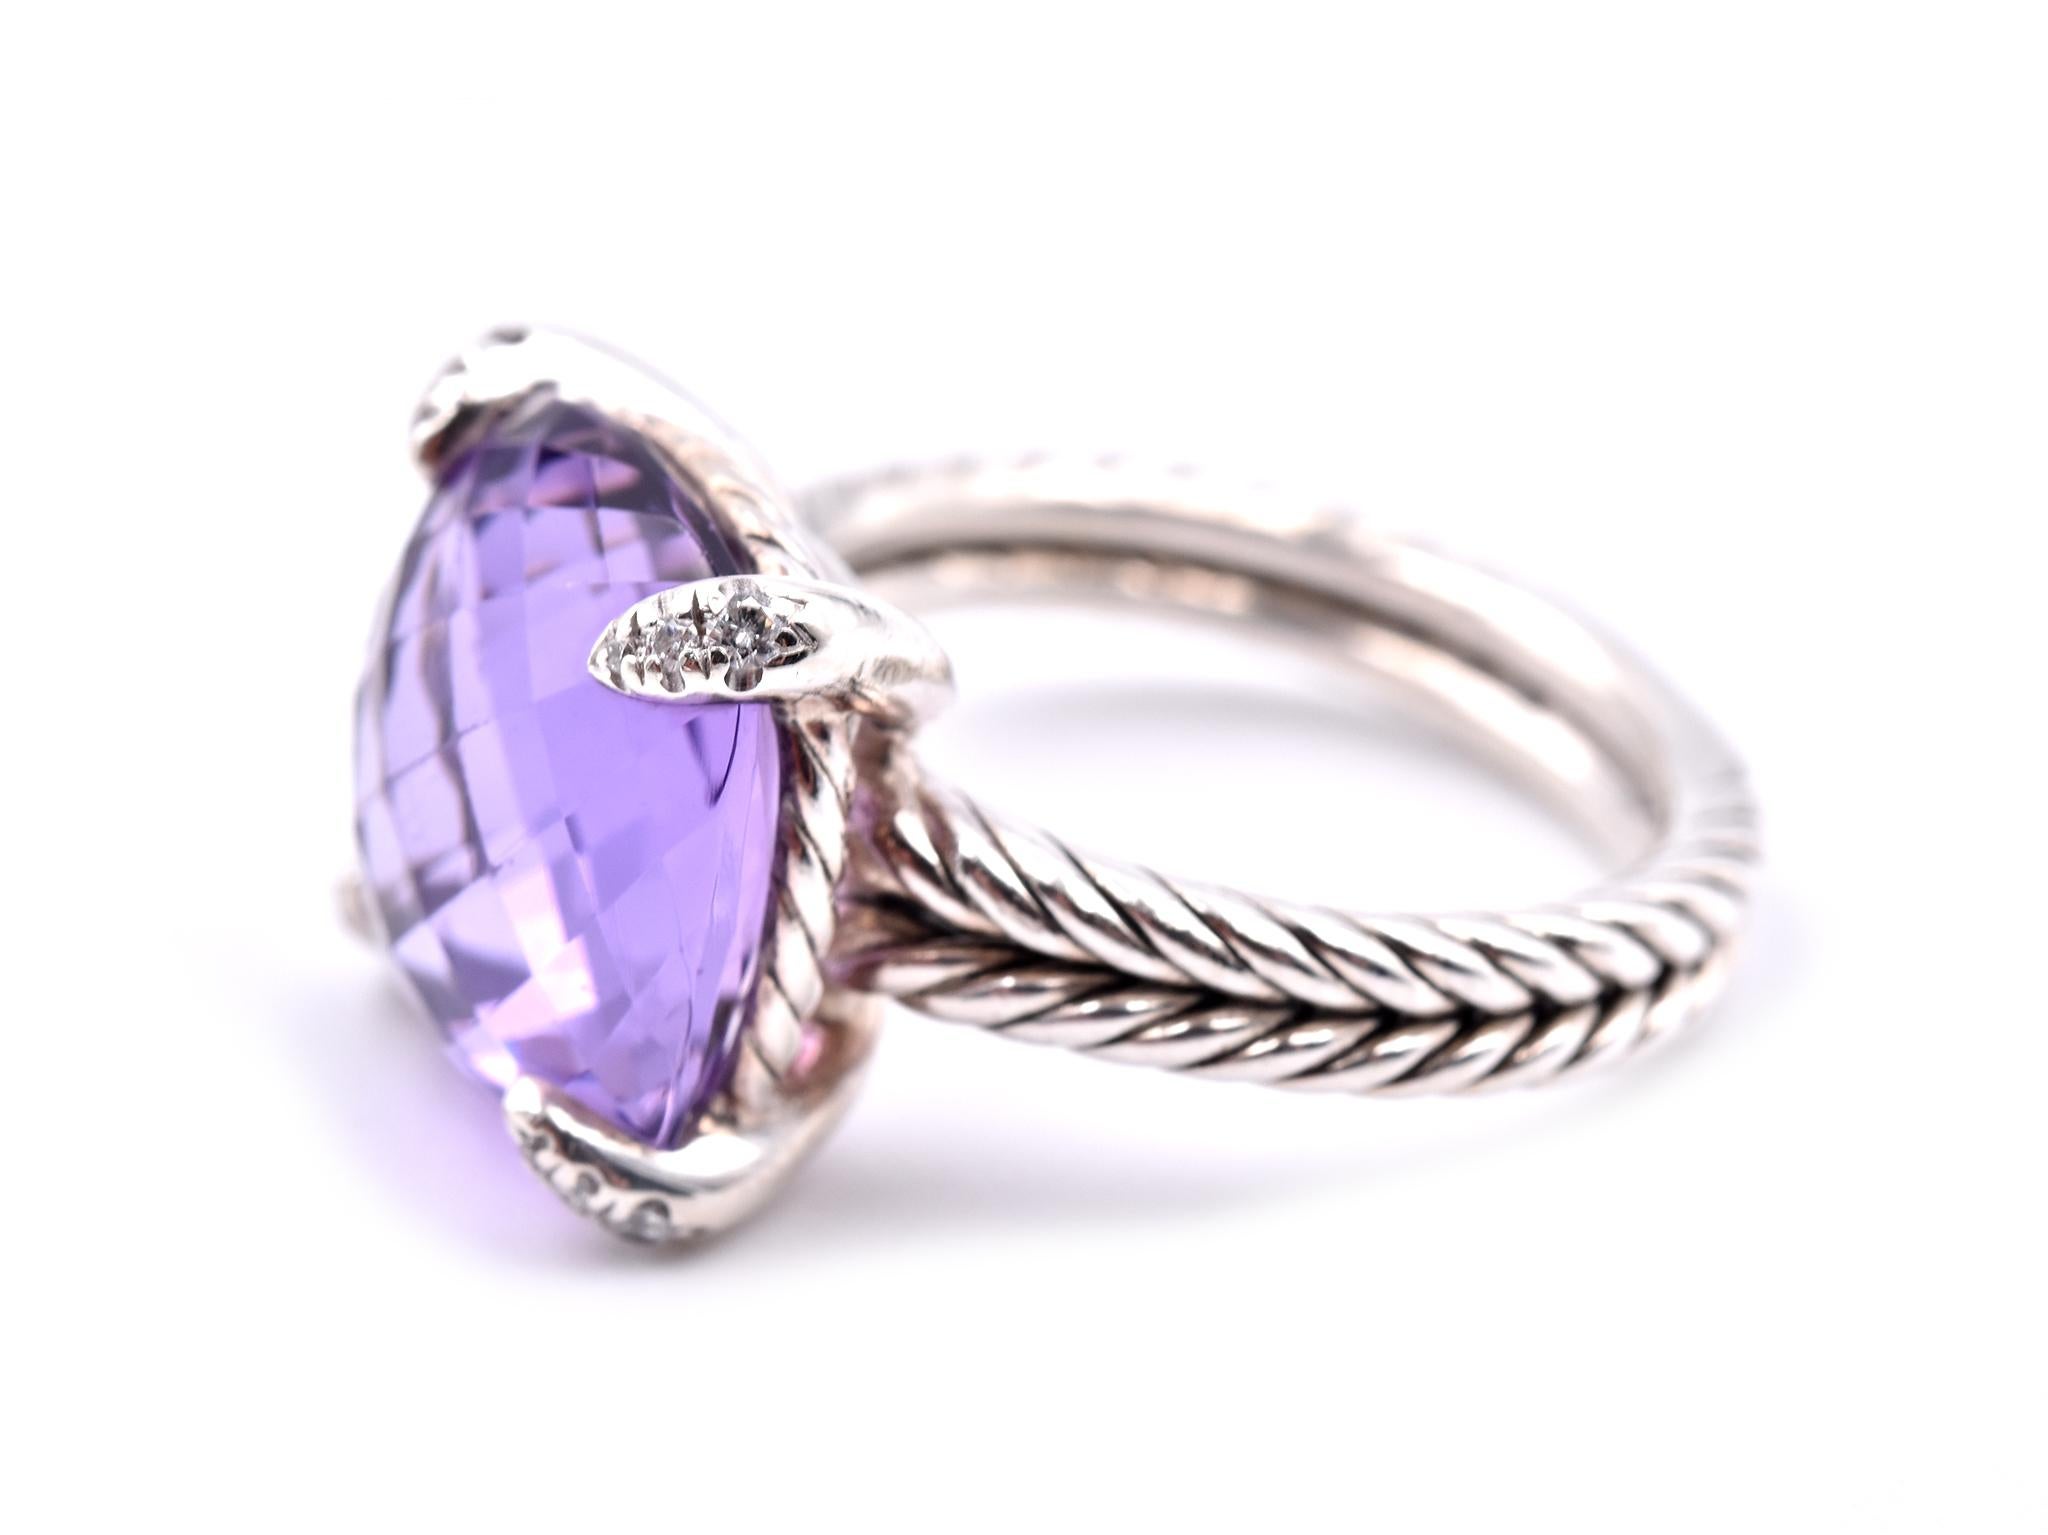 Designer: David Yurman
Material: sterling silver
Size: 8 (please allow two additional shipping days for sizing requests)
Dimensions: ring top is approximately 14mm in diameter  
Weight: 8.36 grams
